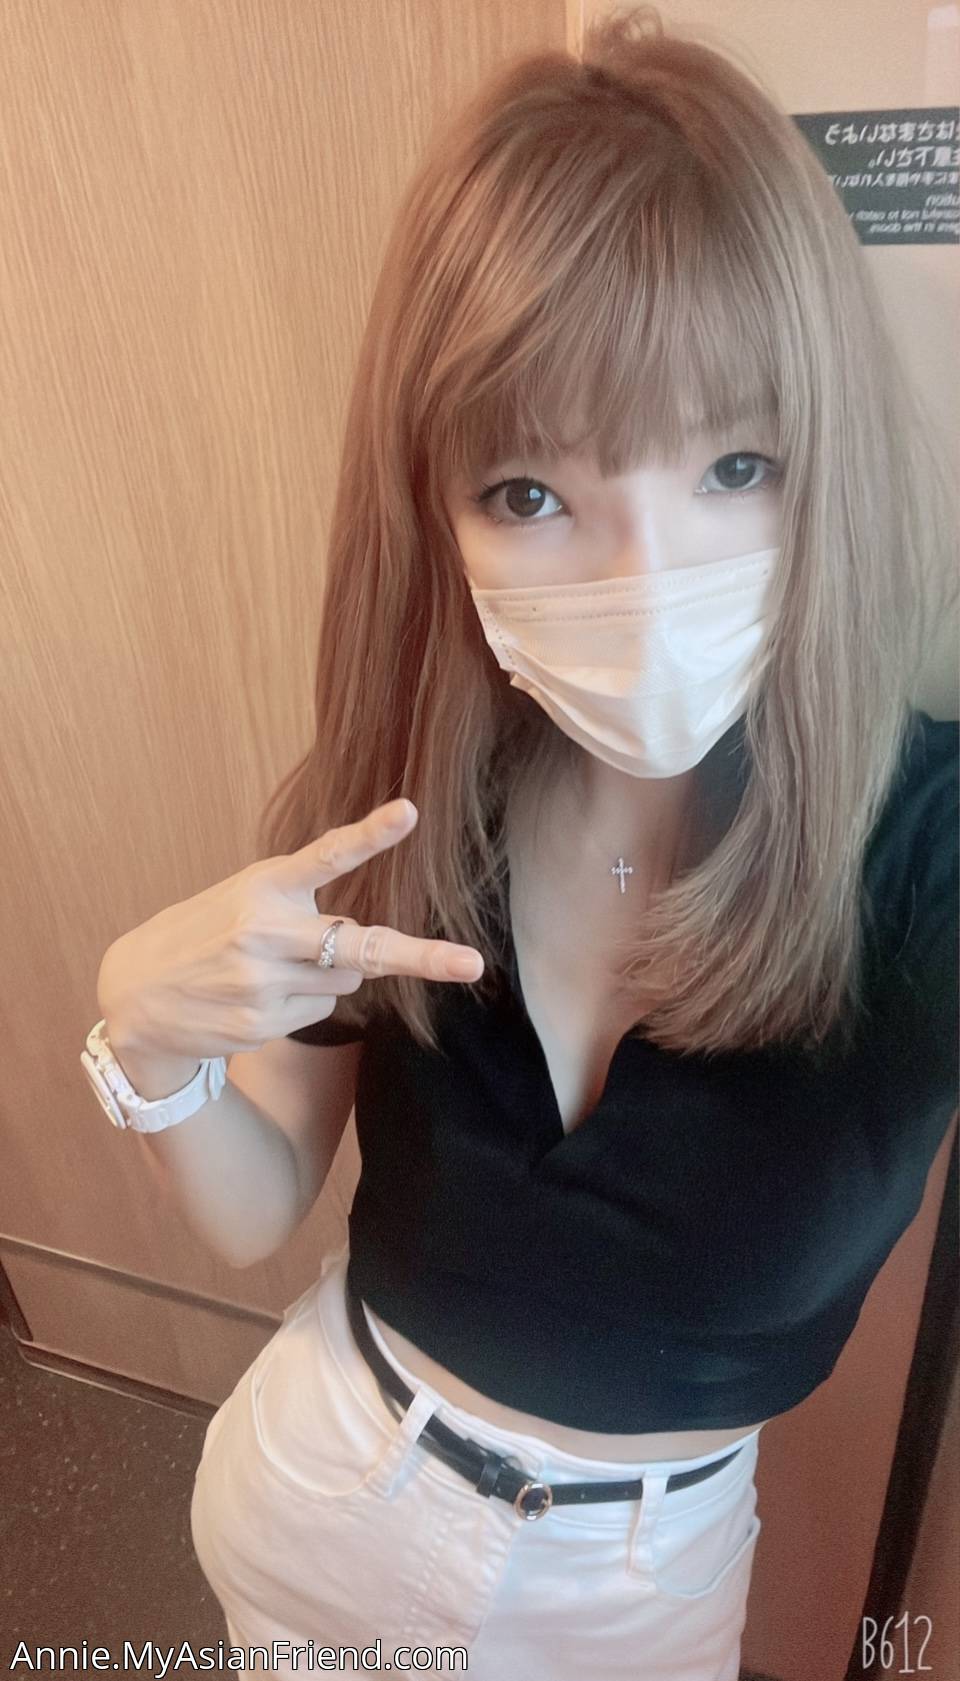 Annie's personal blog photo 1 added Tuesday the 6th of September 2022